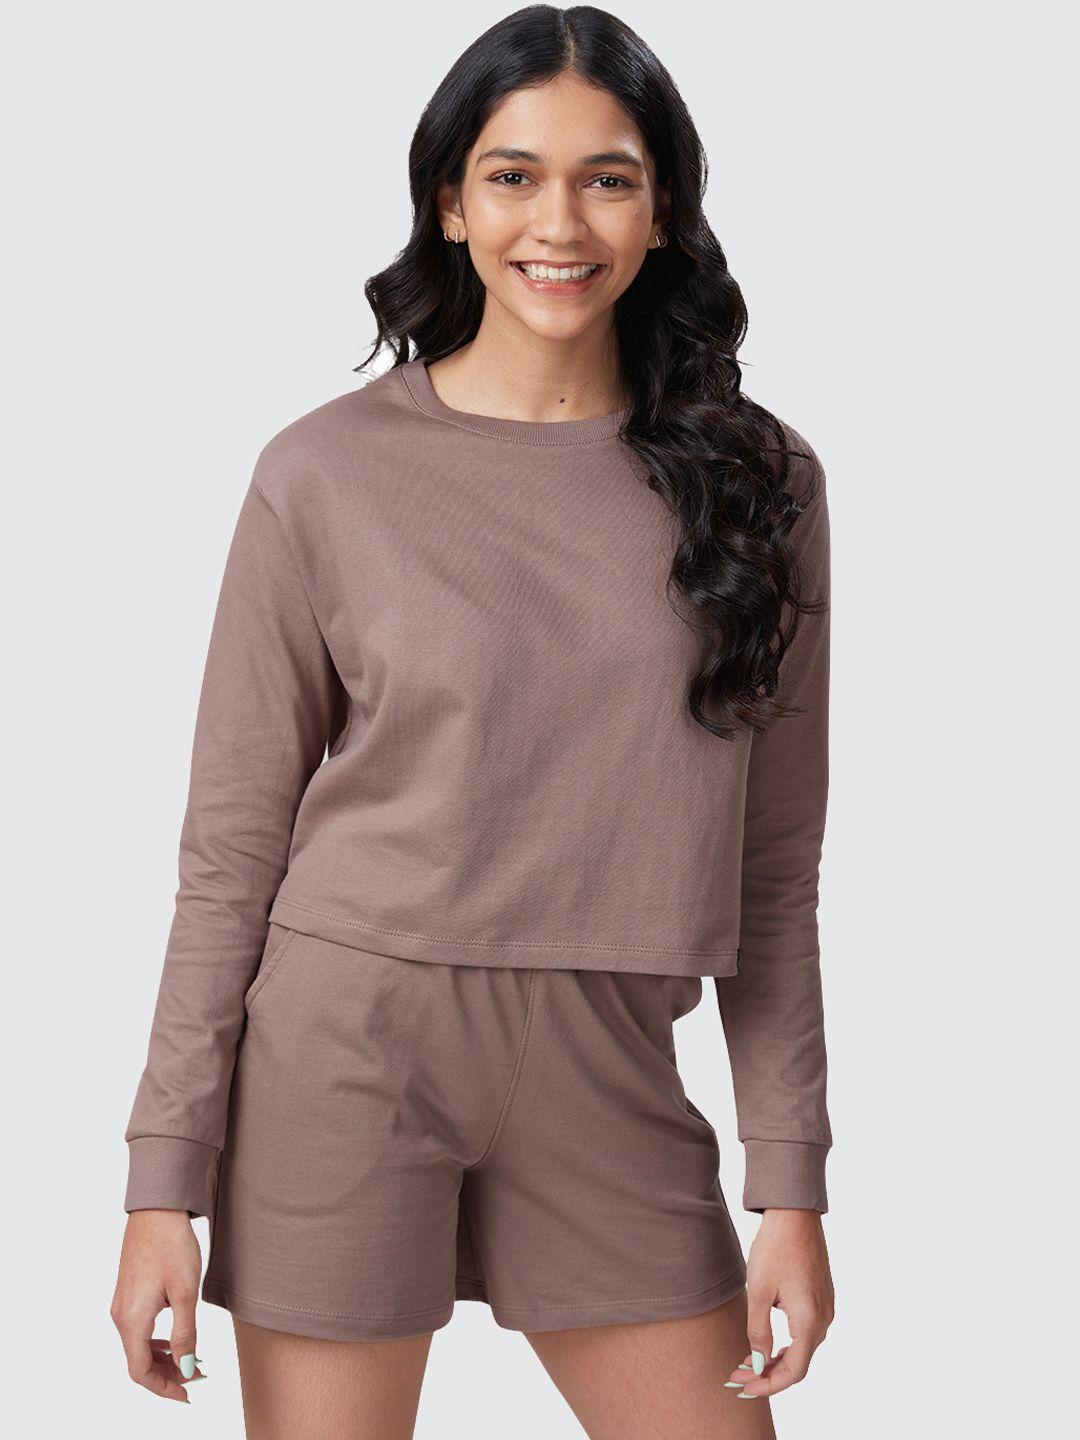 the souled store women brown solid co-ords set